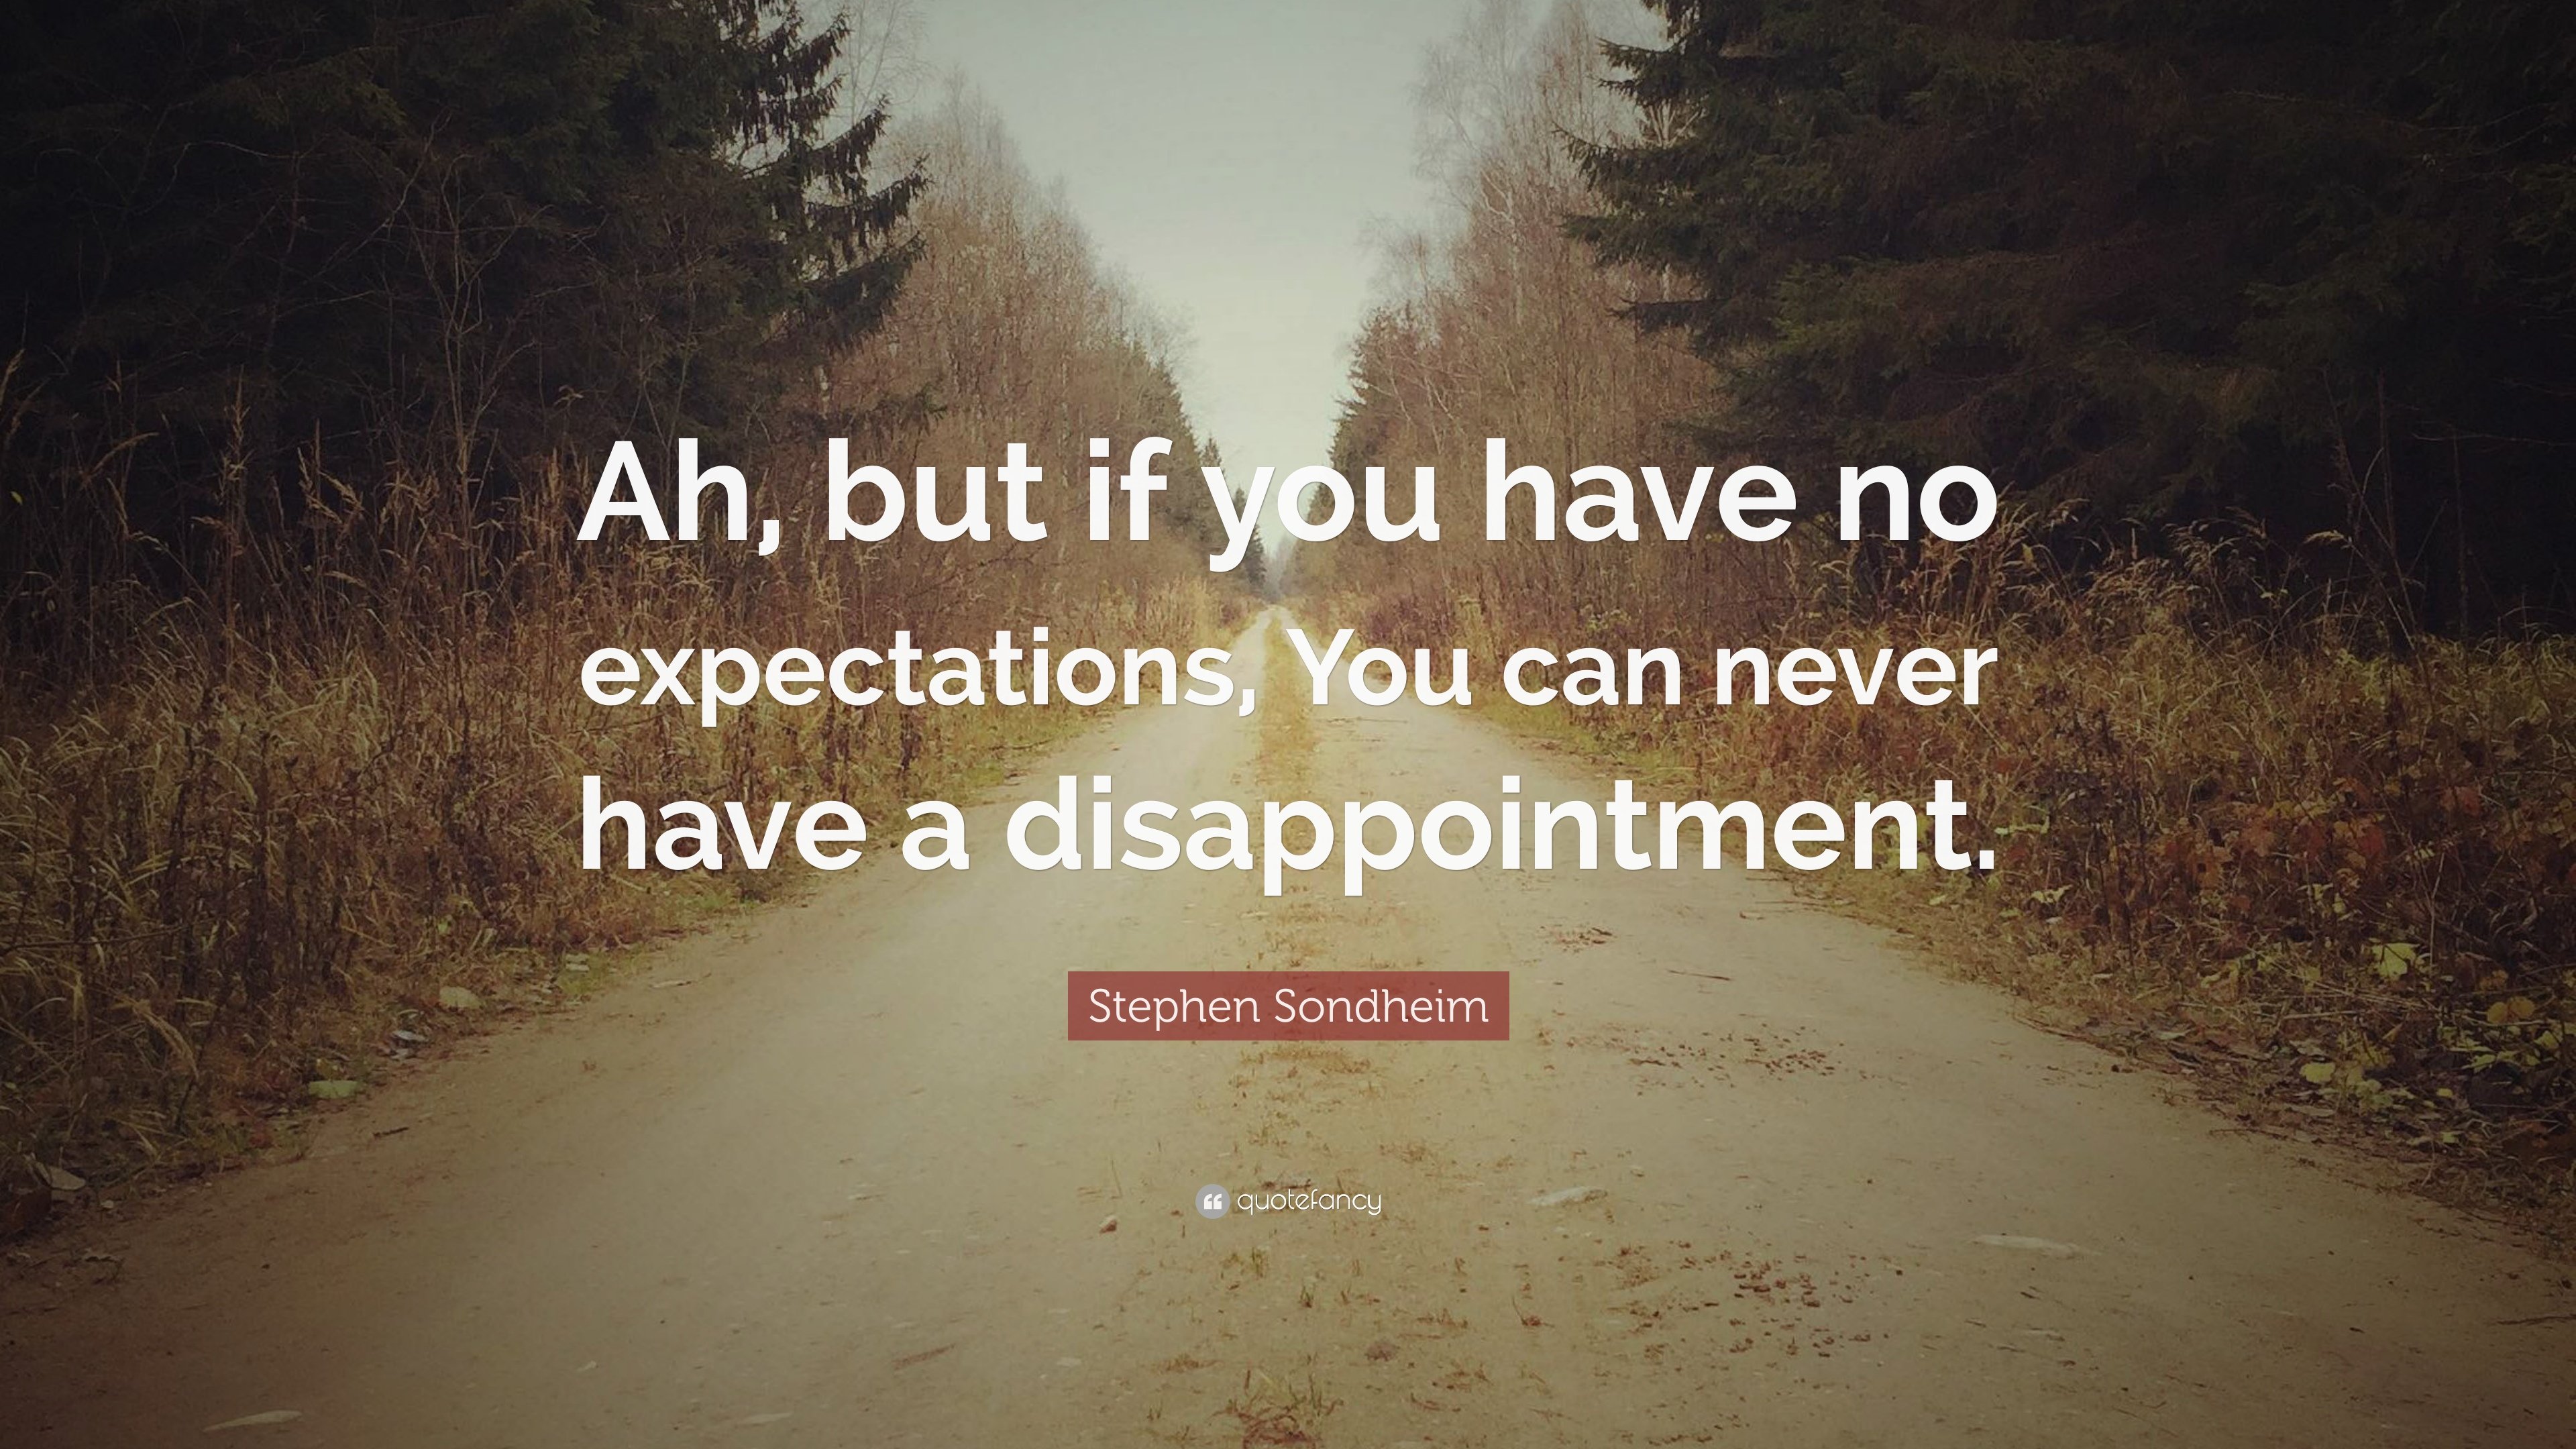 Stephen Sondheim Quote: “Ah, but if you have no expectations